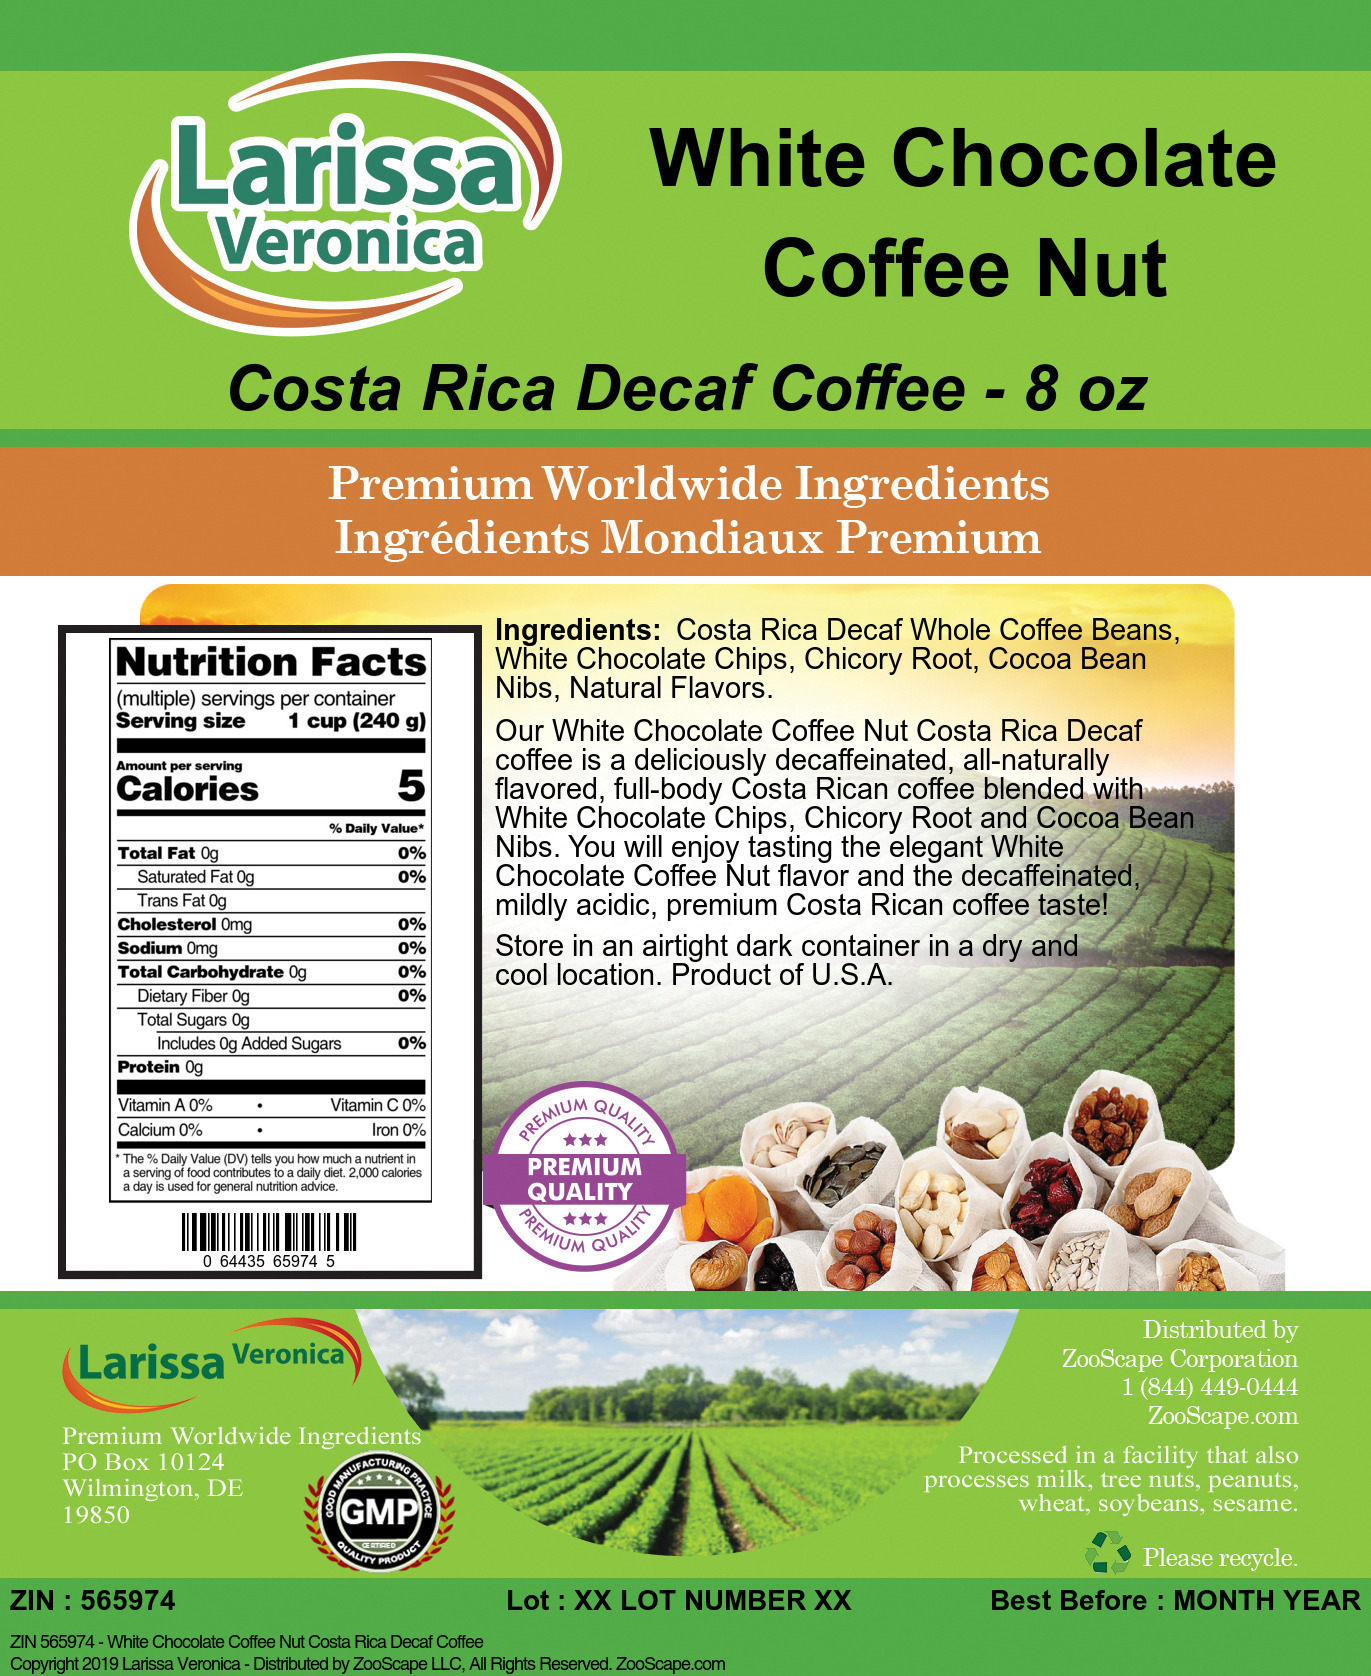 White Chocolate Coffee Nut Costa Rica Decaf Coffee - Label